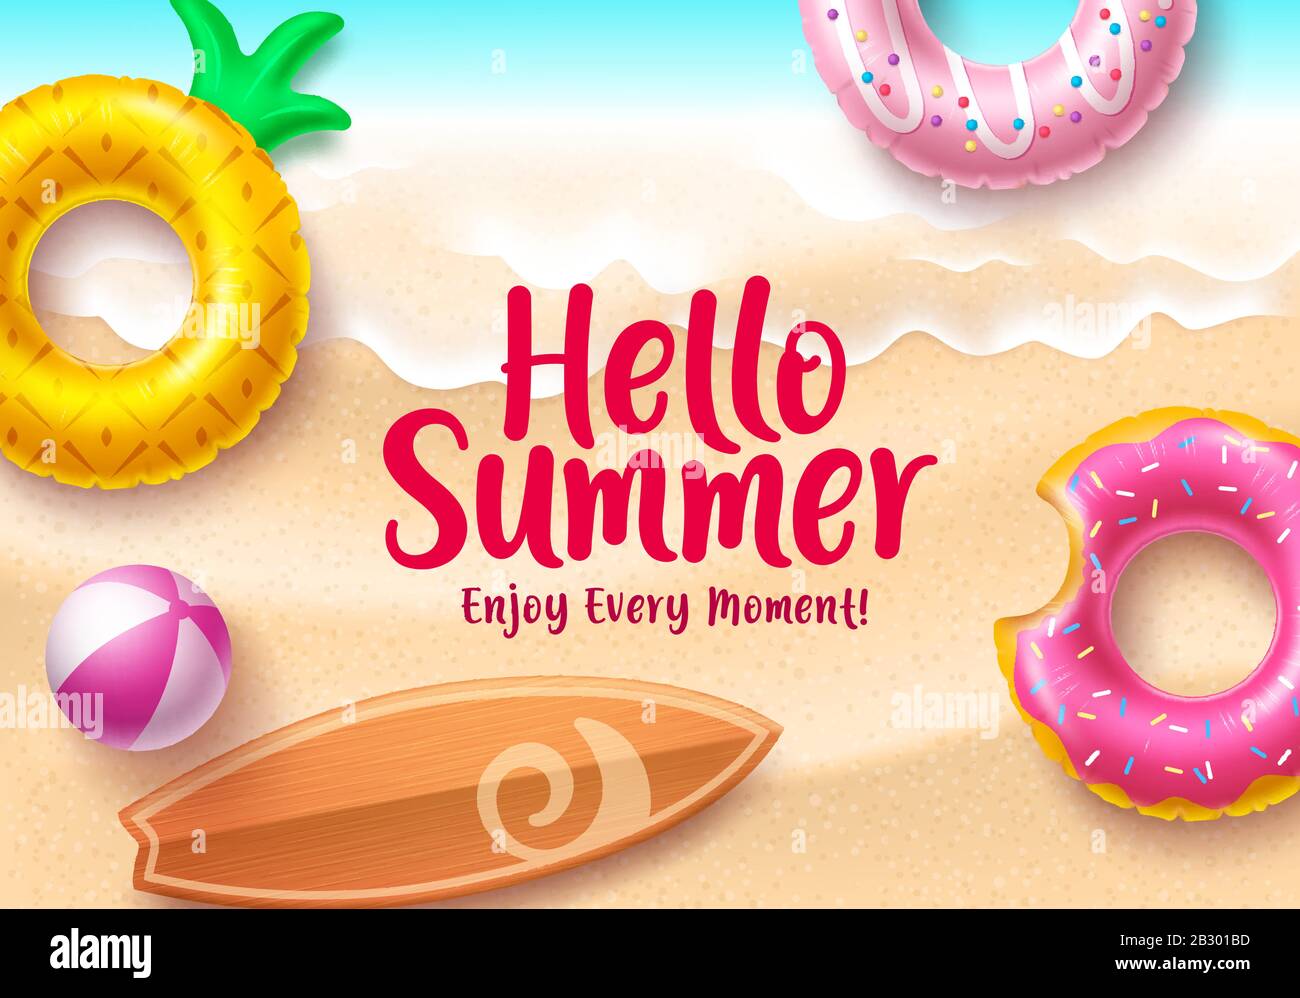 Hello summer vector banner design. Hello summer text with colorful beach elements like floating donut and pineapple floaters in seaside top view Stock Vector